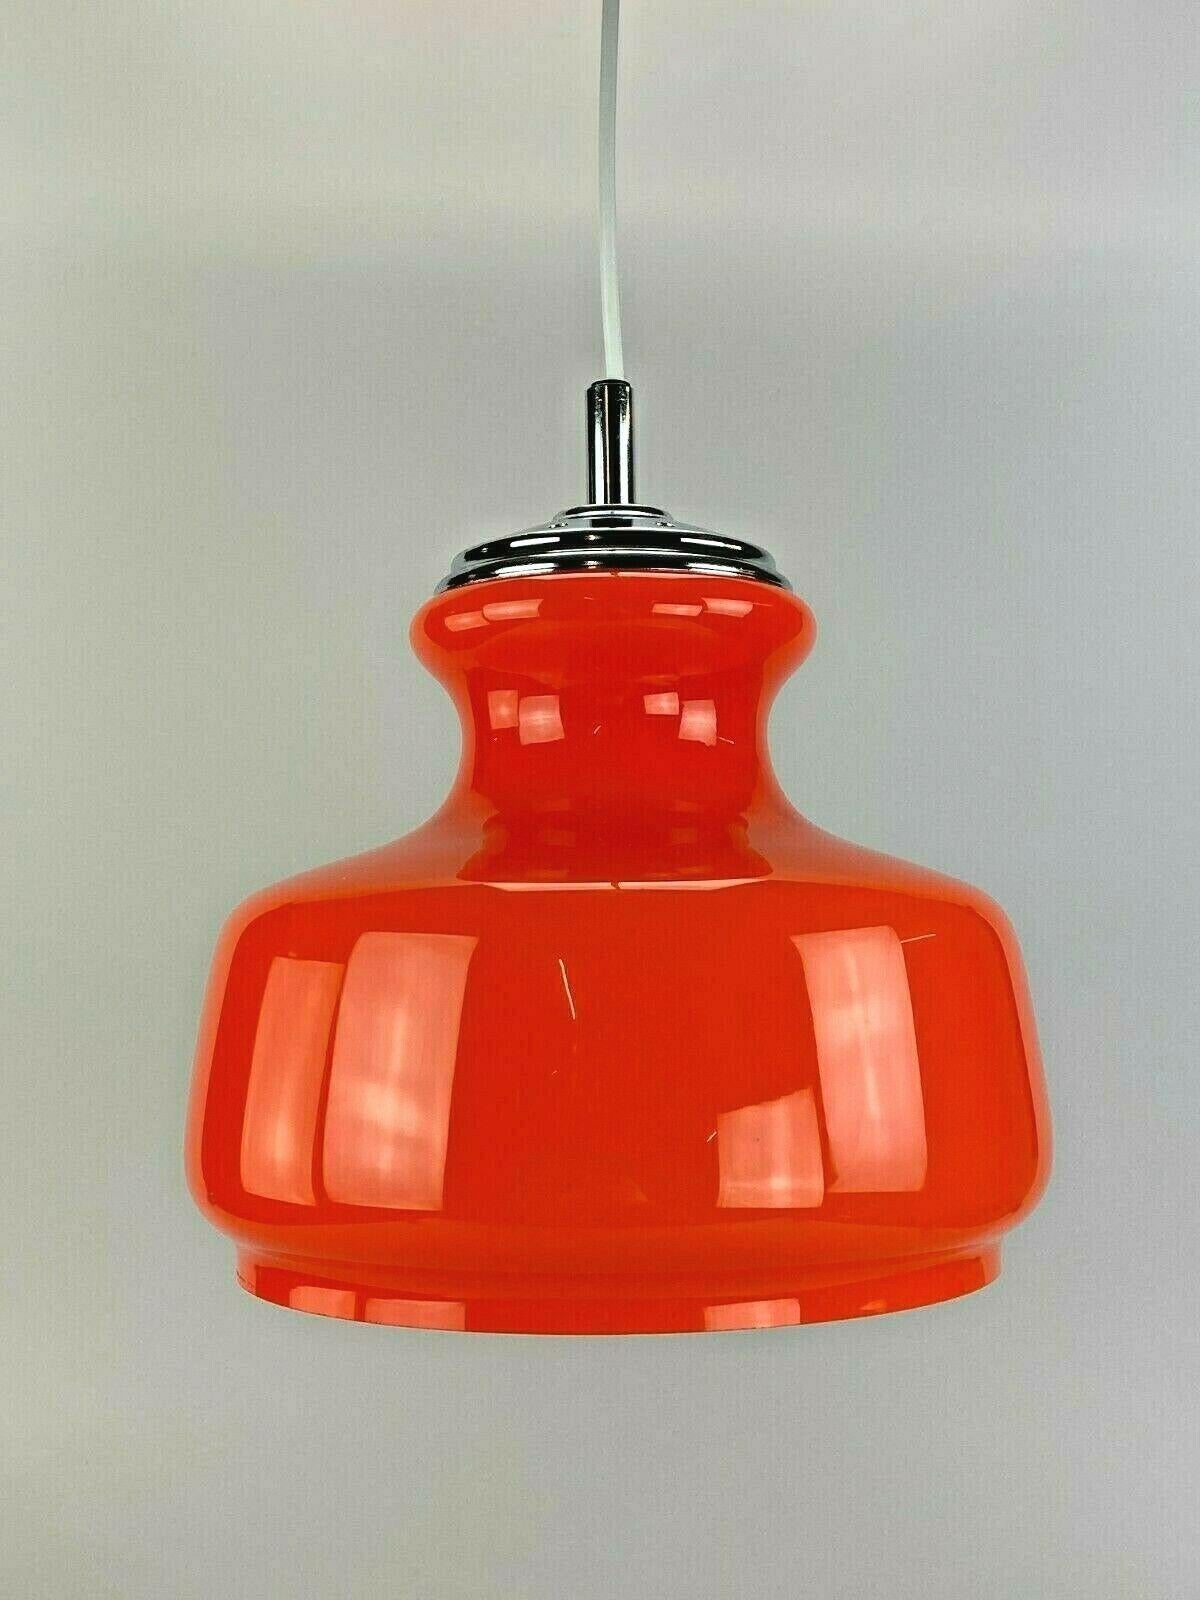 70s lamp light hanging lamp ceiling lamp space age design chrome glass

Object: hanging lamp

Manufacturer:

Condition: good

Age: around 1960-1970

Dimensions:

Diameter = 26cm
Height = 24cm

Other notes:

The pictures serve as